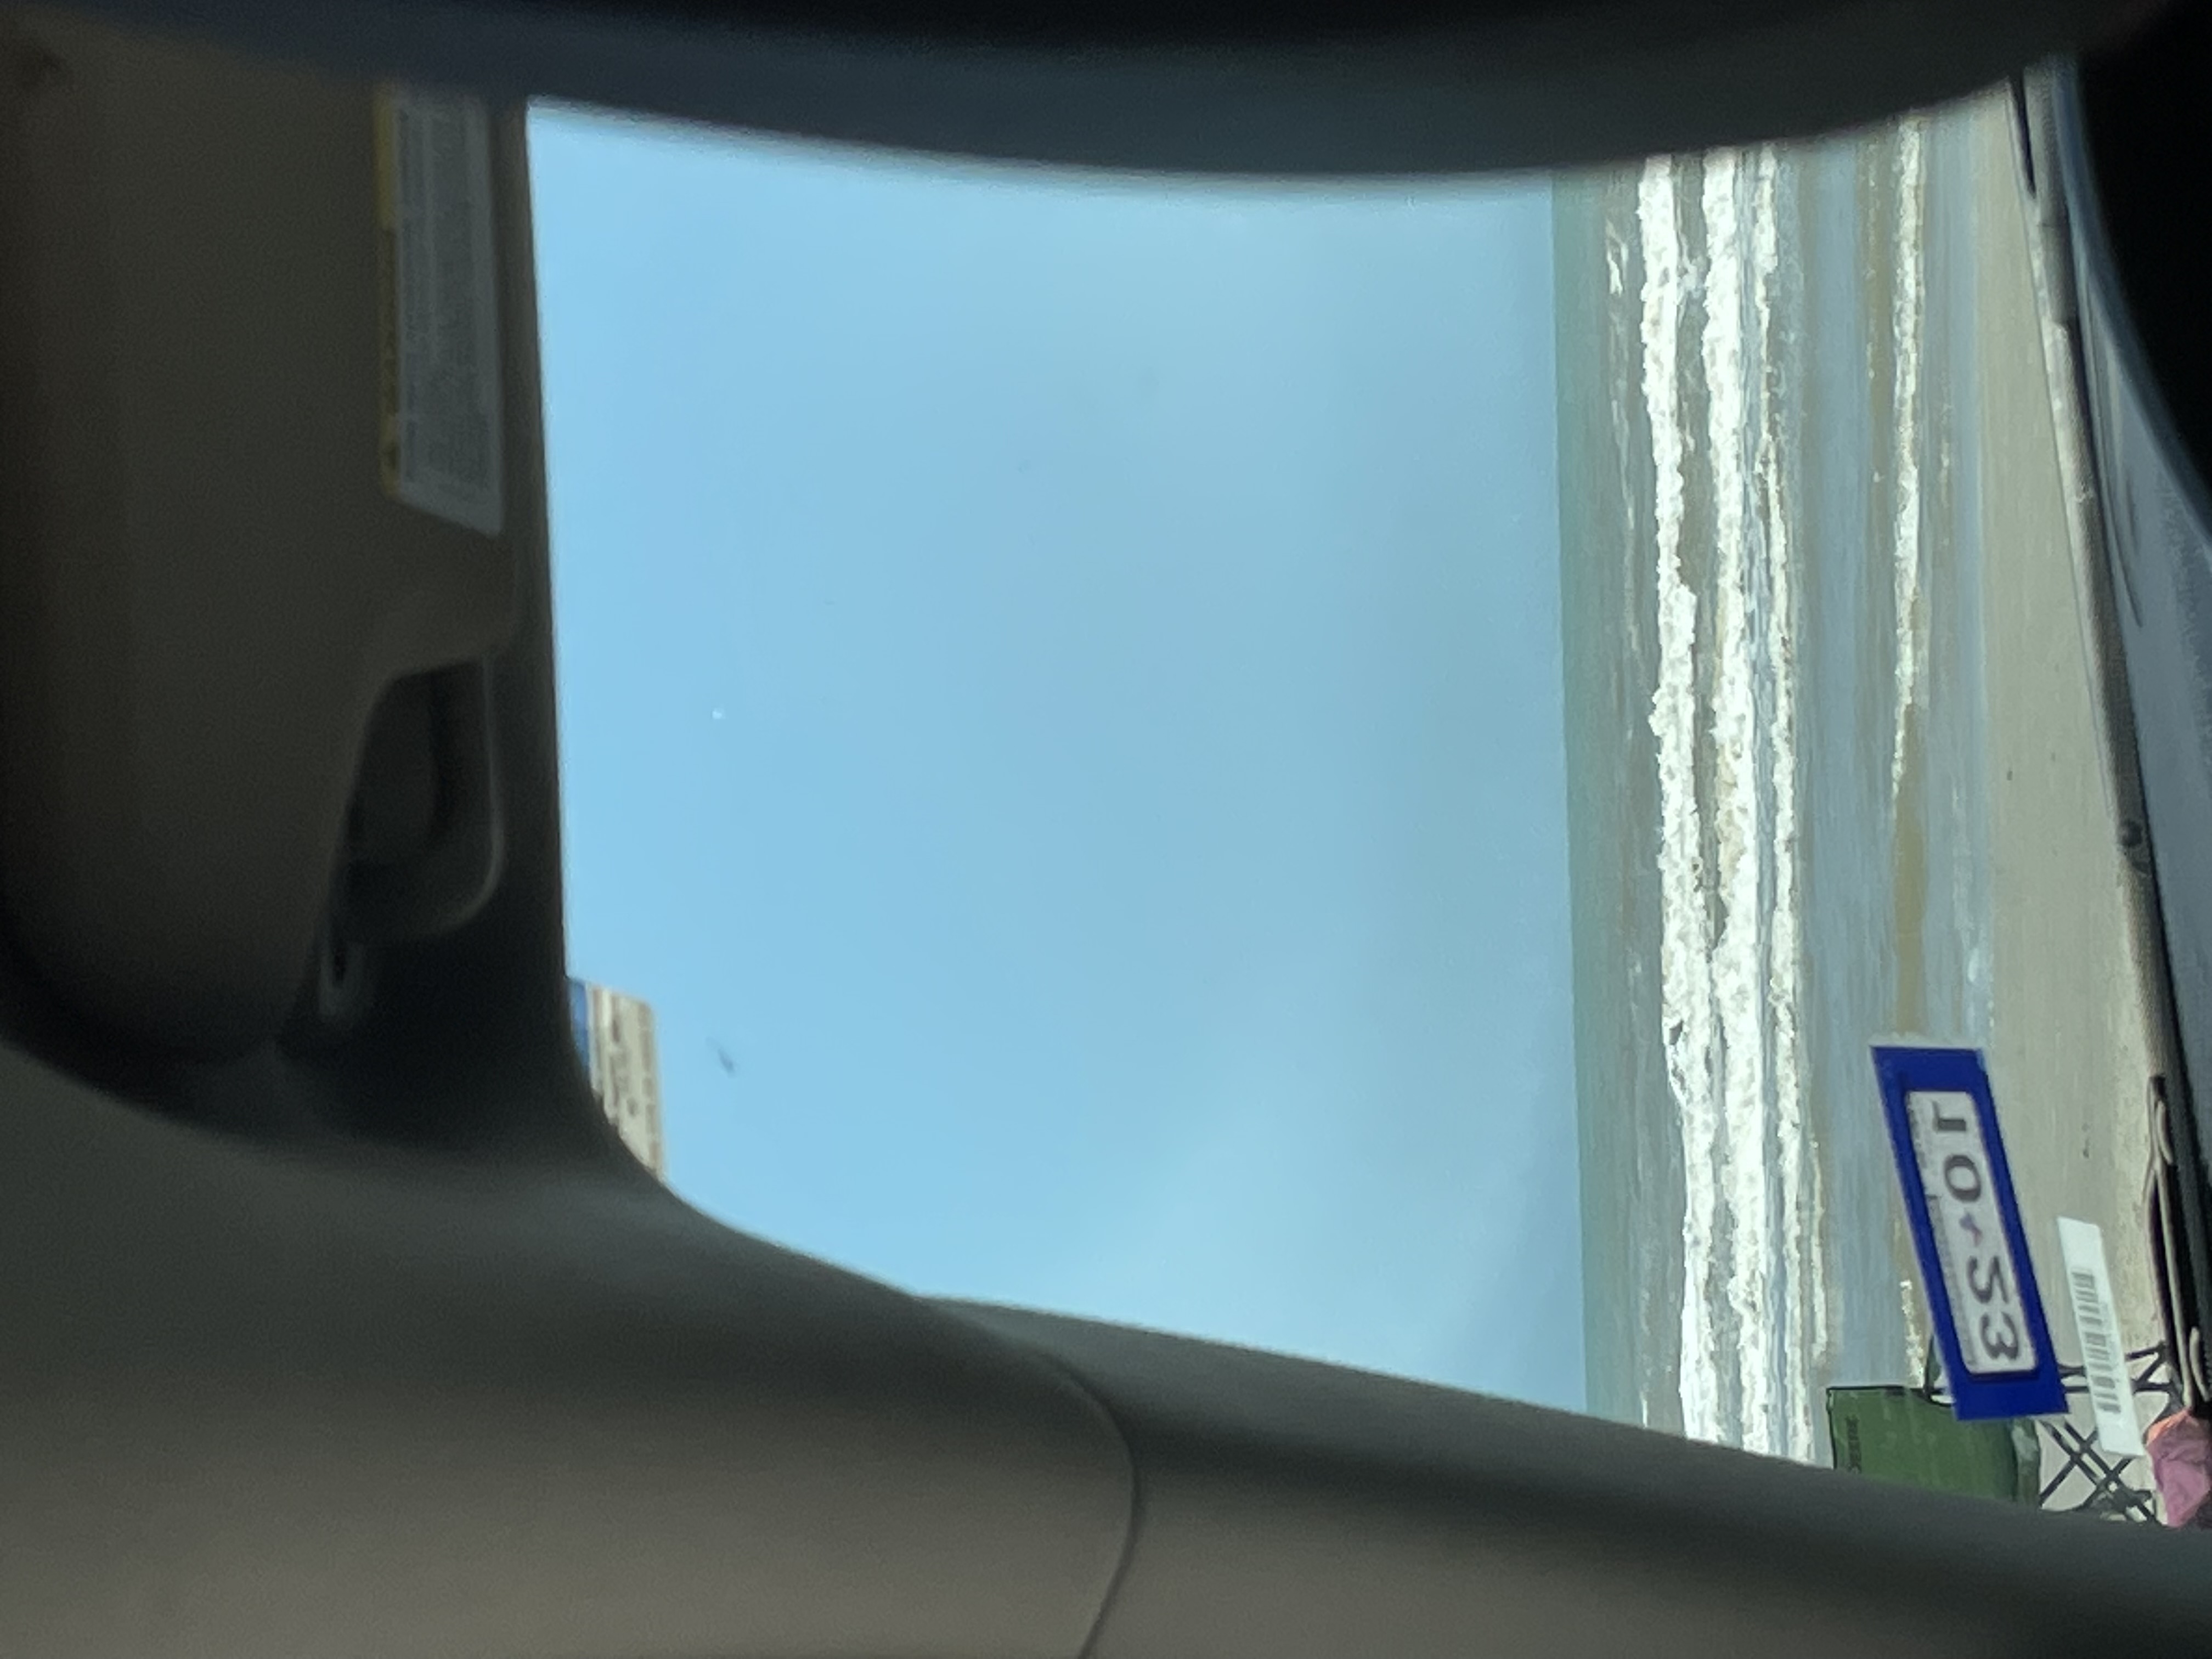 Image looking out of a car windshield to see a beach and the ocean